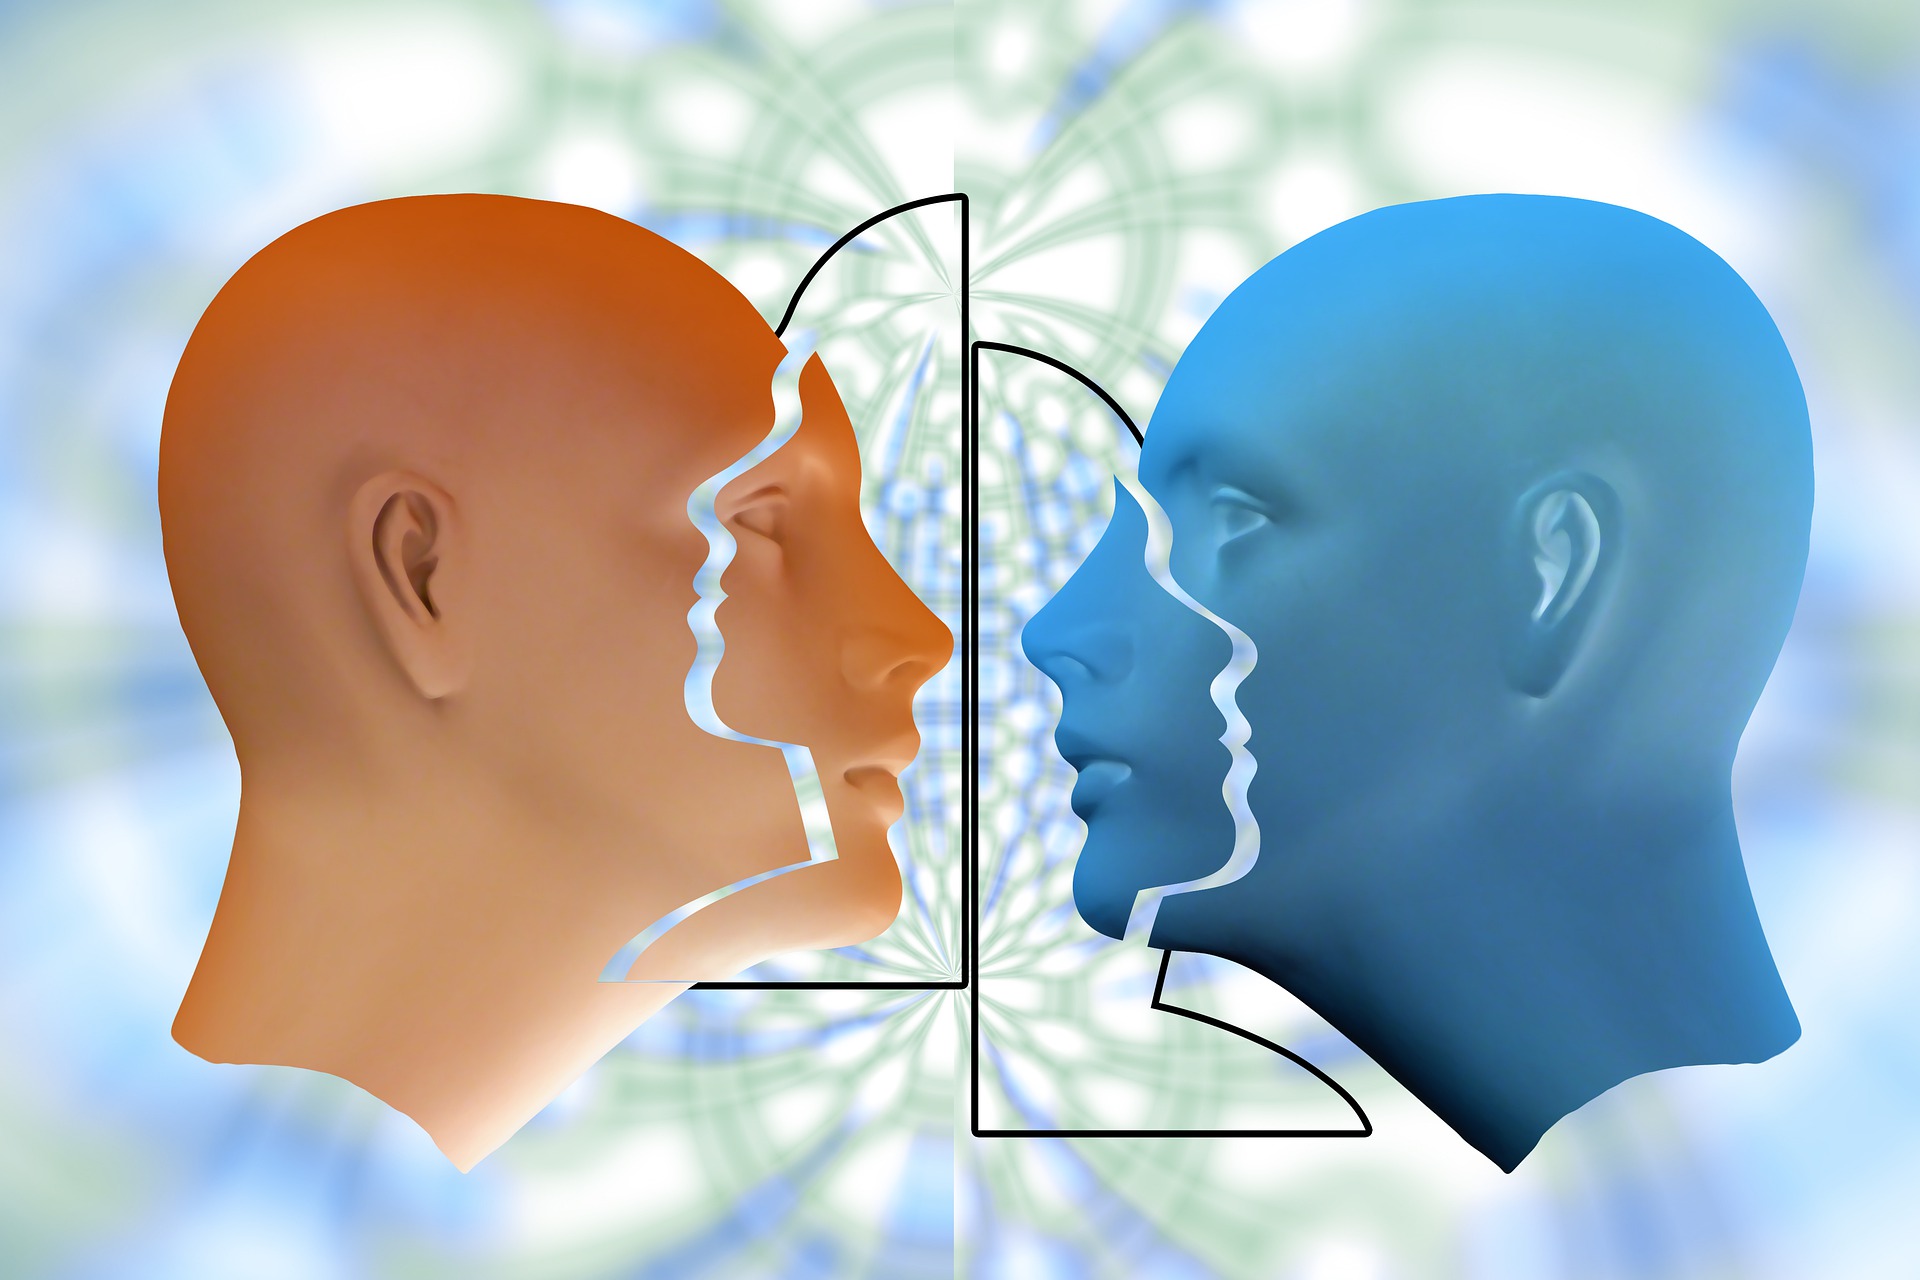 two faces, facing eachother against a prism background